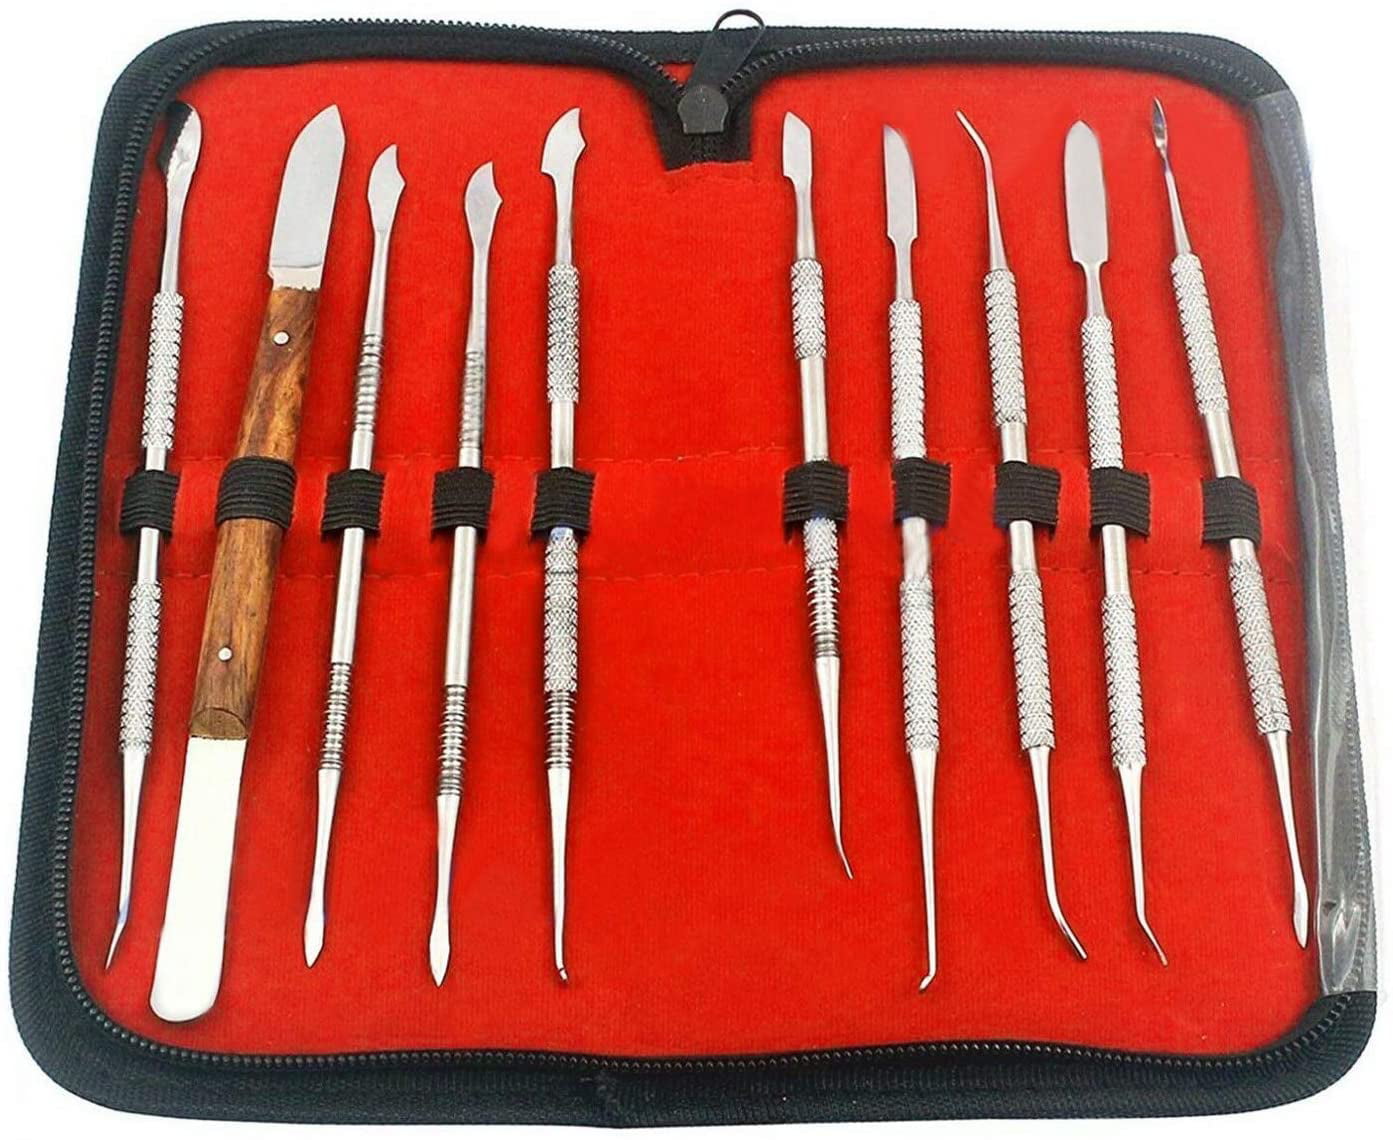 Steel Wax Carver Clay Pottery Sculpture Tools Carving Tool Set